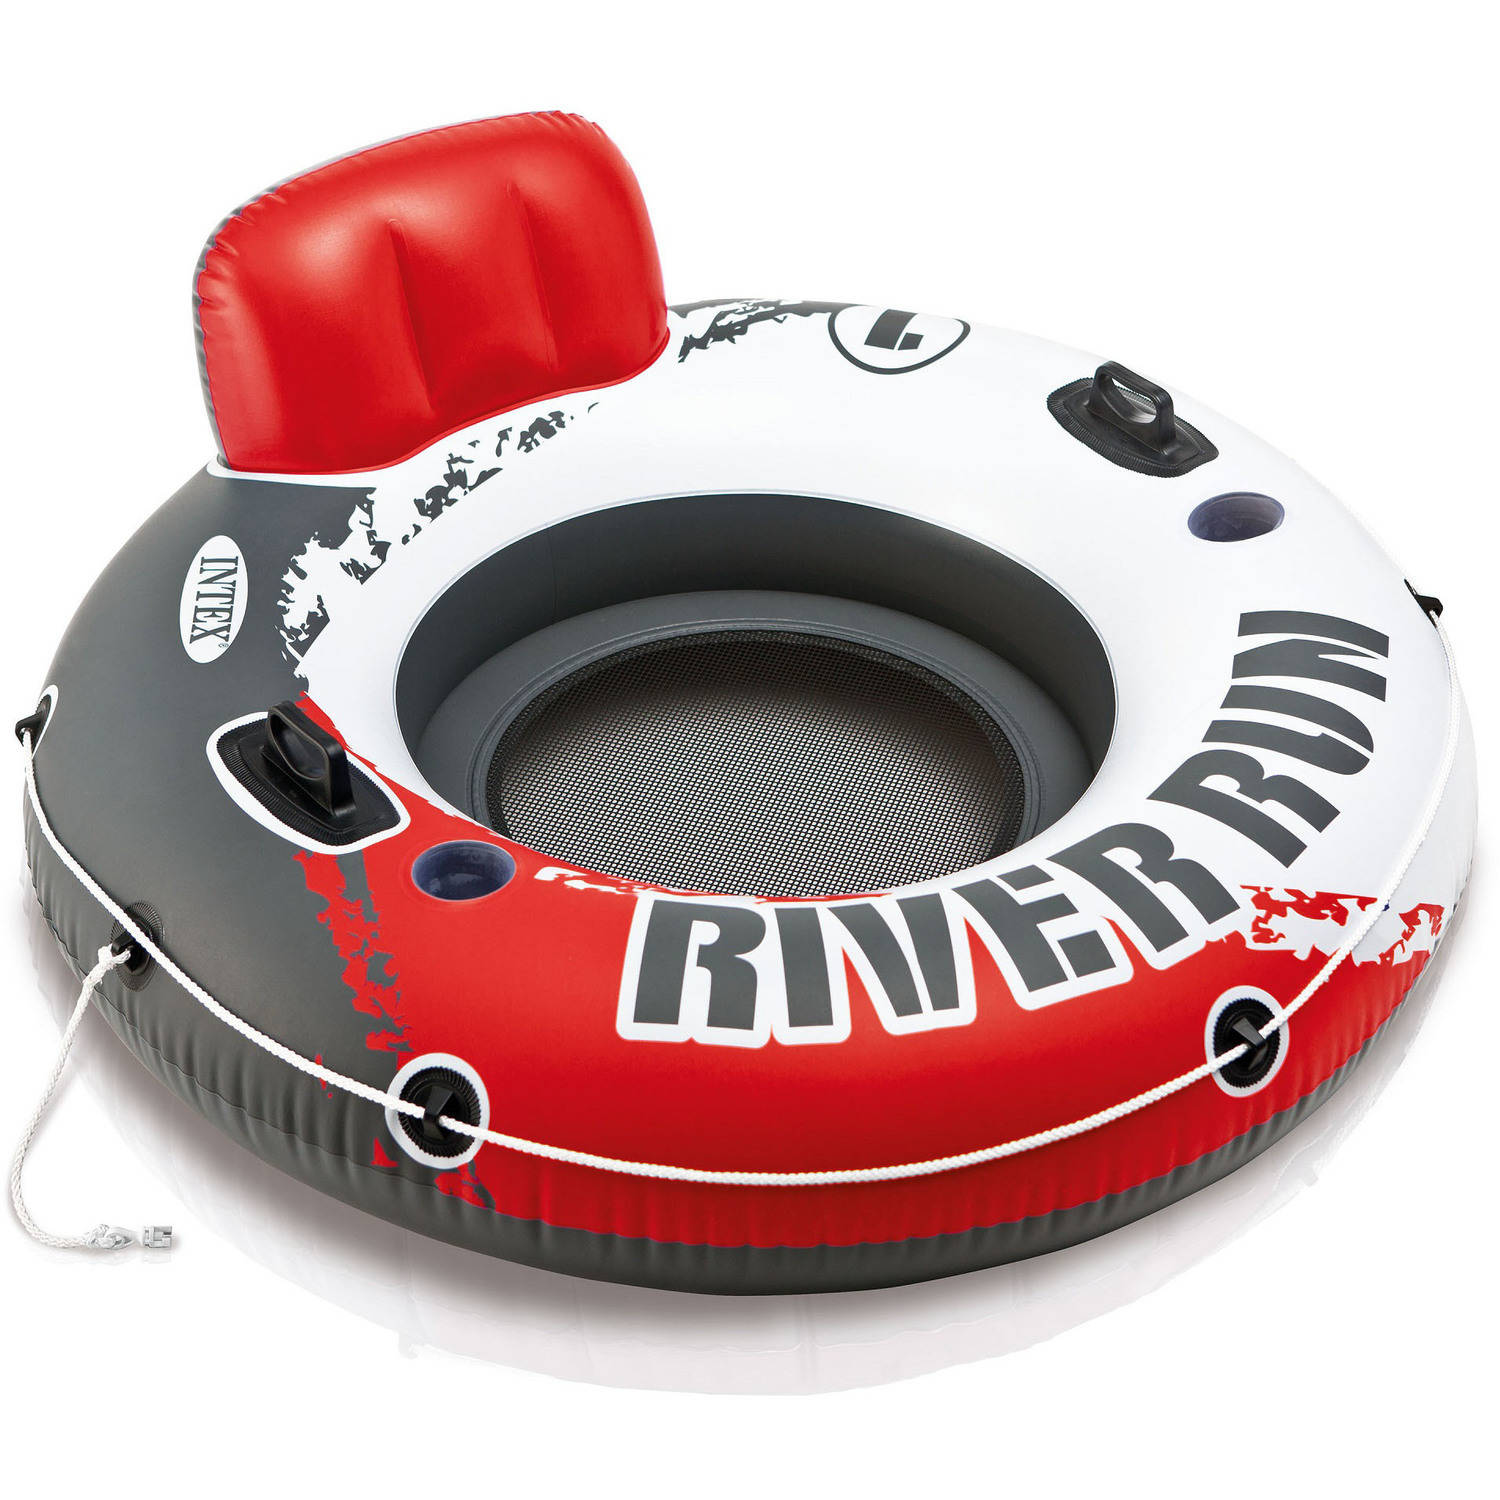 53" Intex Red River Run Inflatable Floating Pool Tube $14.86